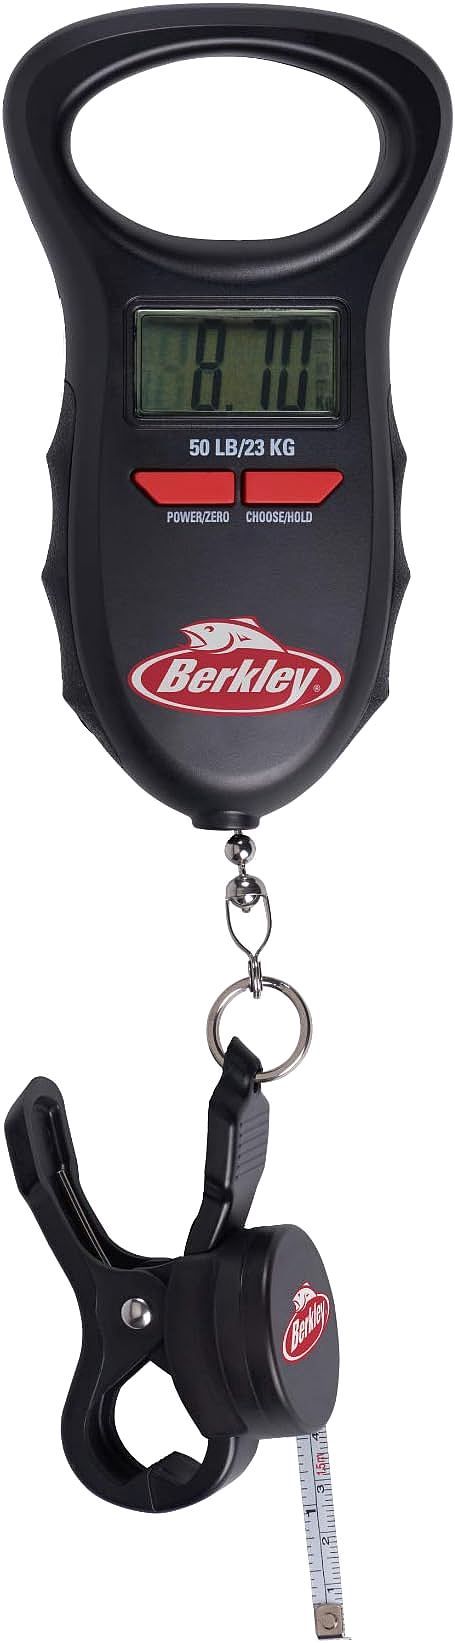 Measure Your Catch with Precision - Berkley BCMDFS50T Digital Fishing Scale